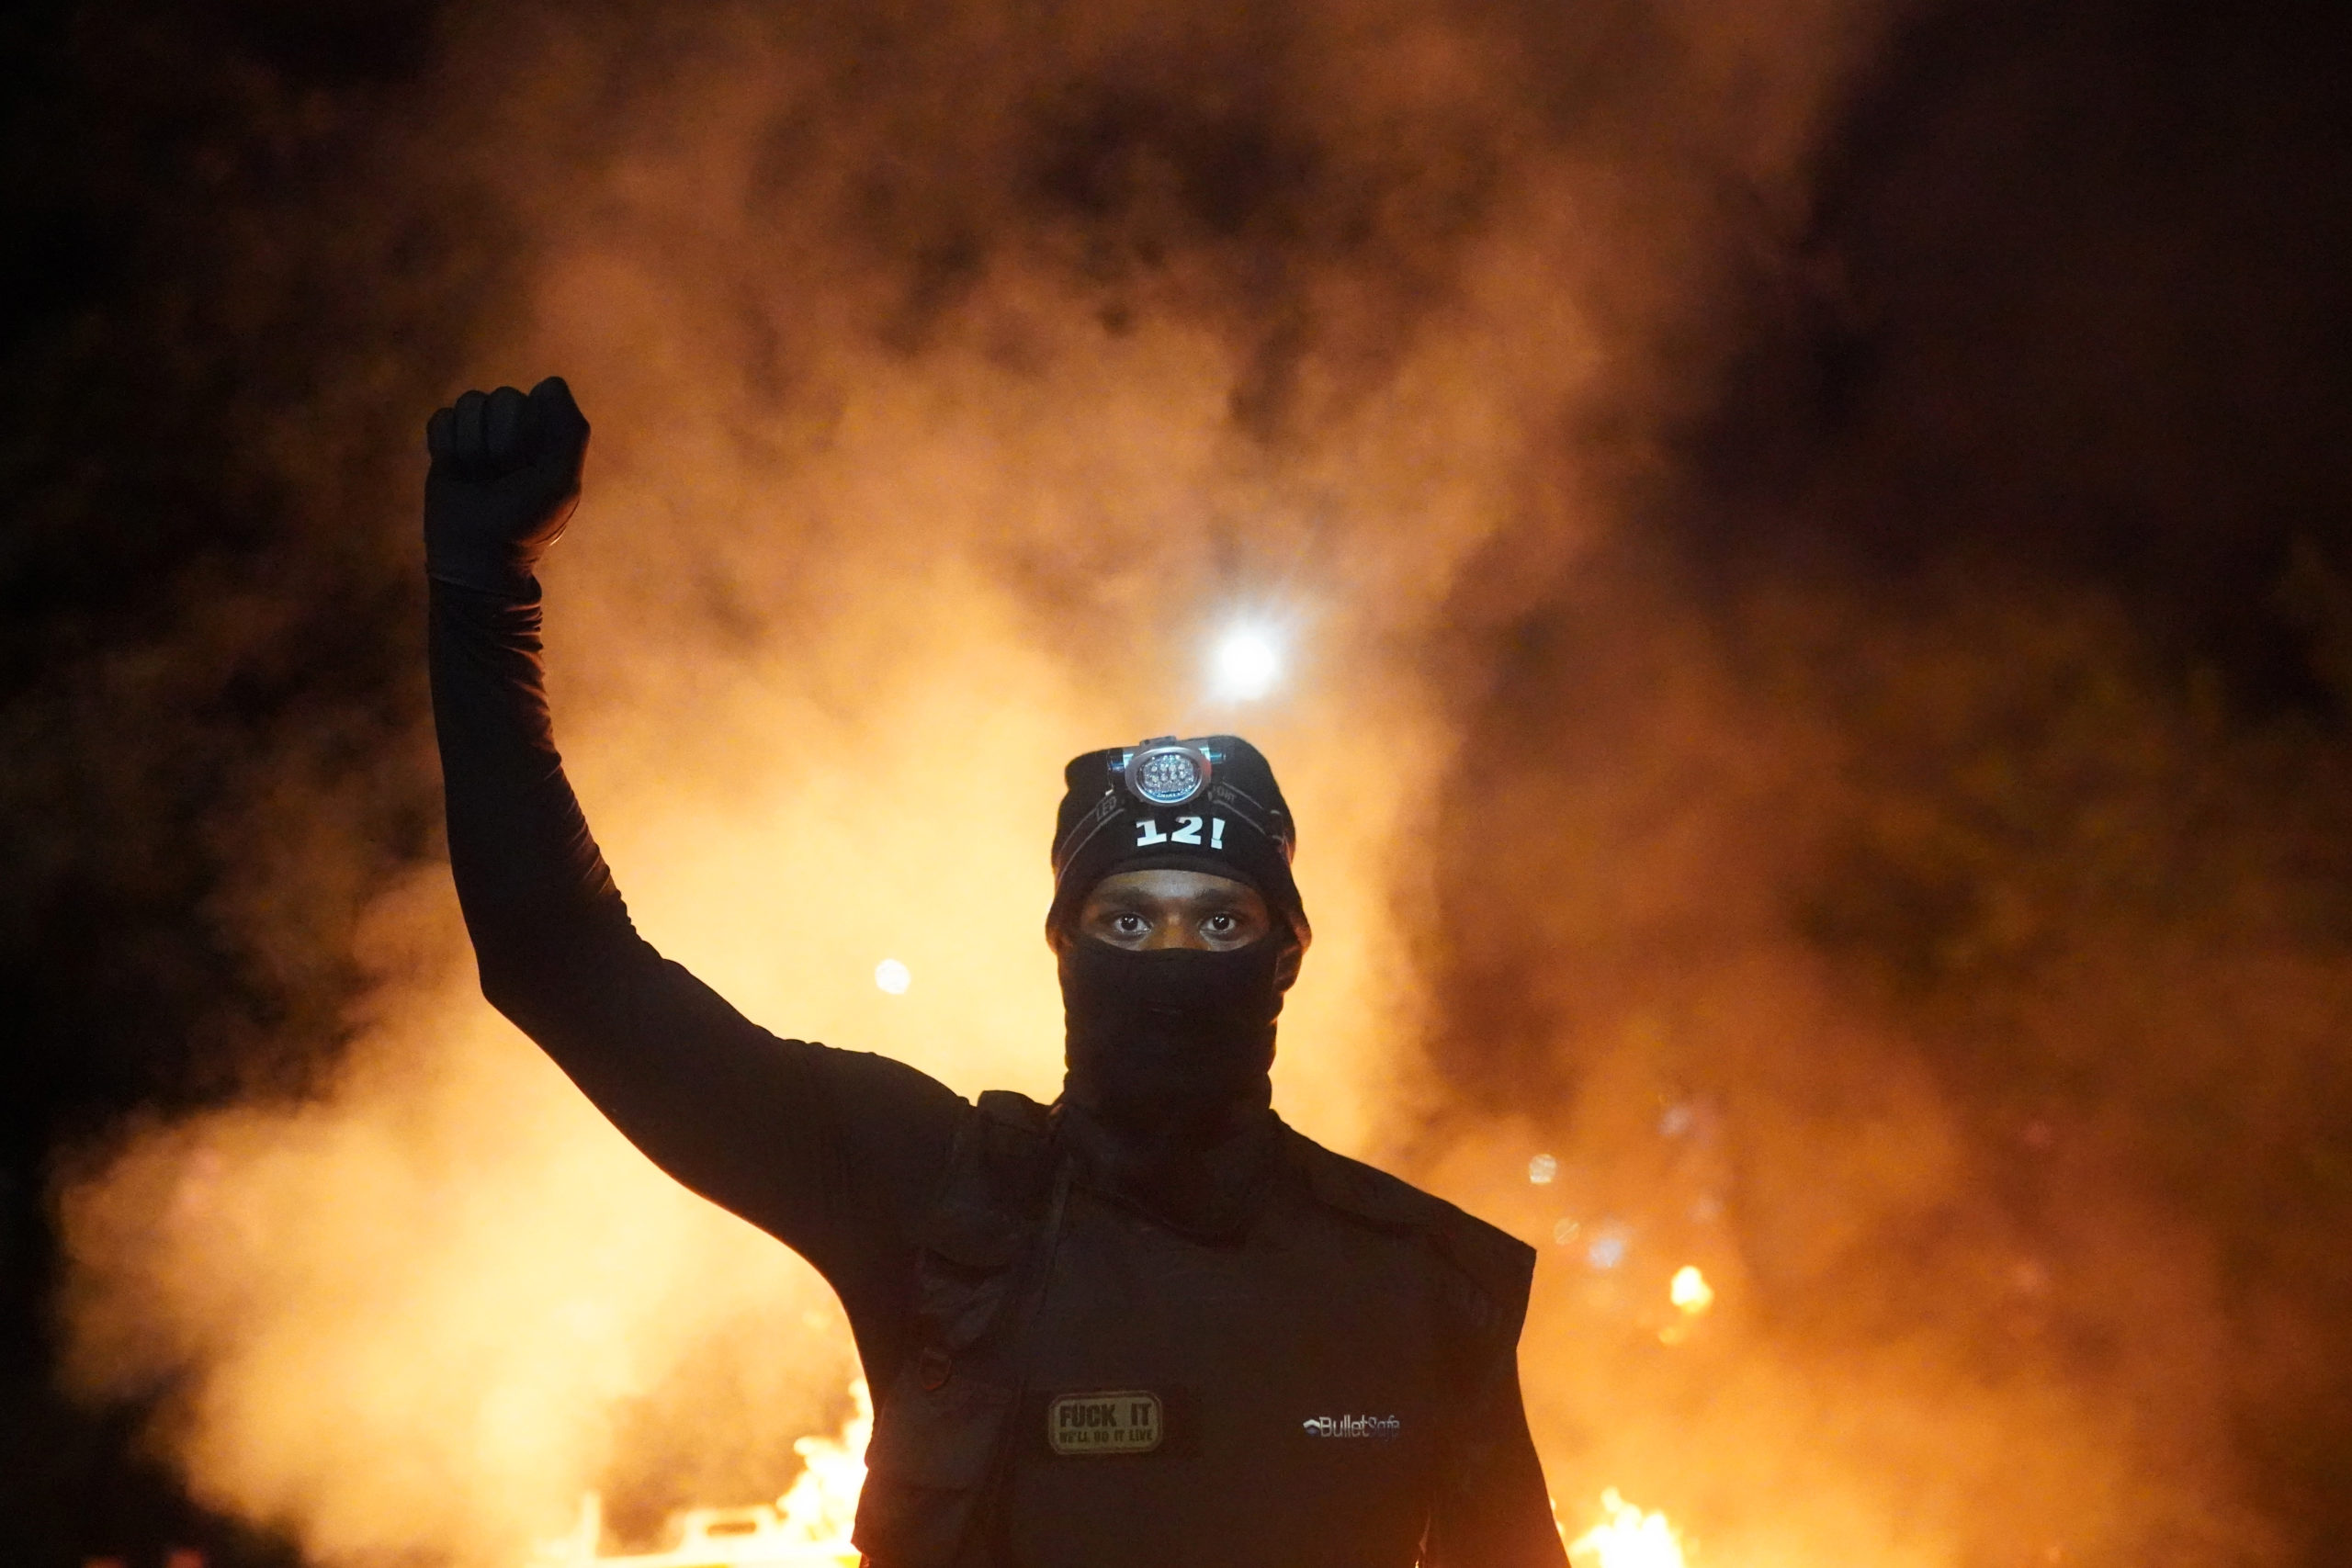 PORTLAND, OR - AUGUST 23: A protester holds his fist in the air during a protest against racial injustice and police brutality early in the morning on August 23, 2020 in Portland, Oregon. Hundreds of protesters clashed with police Saturday night following a rally in east Portland. (Photo by Nathan Howard/Getty Images)